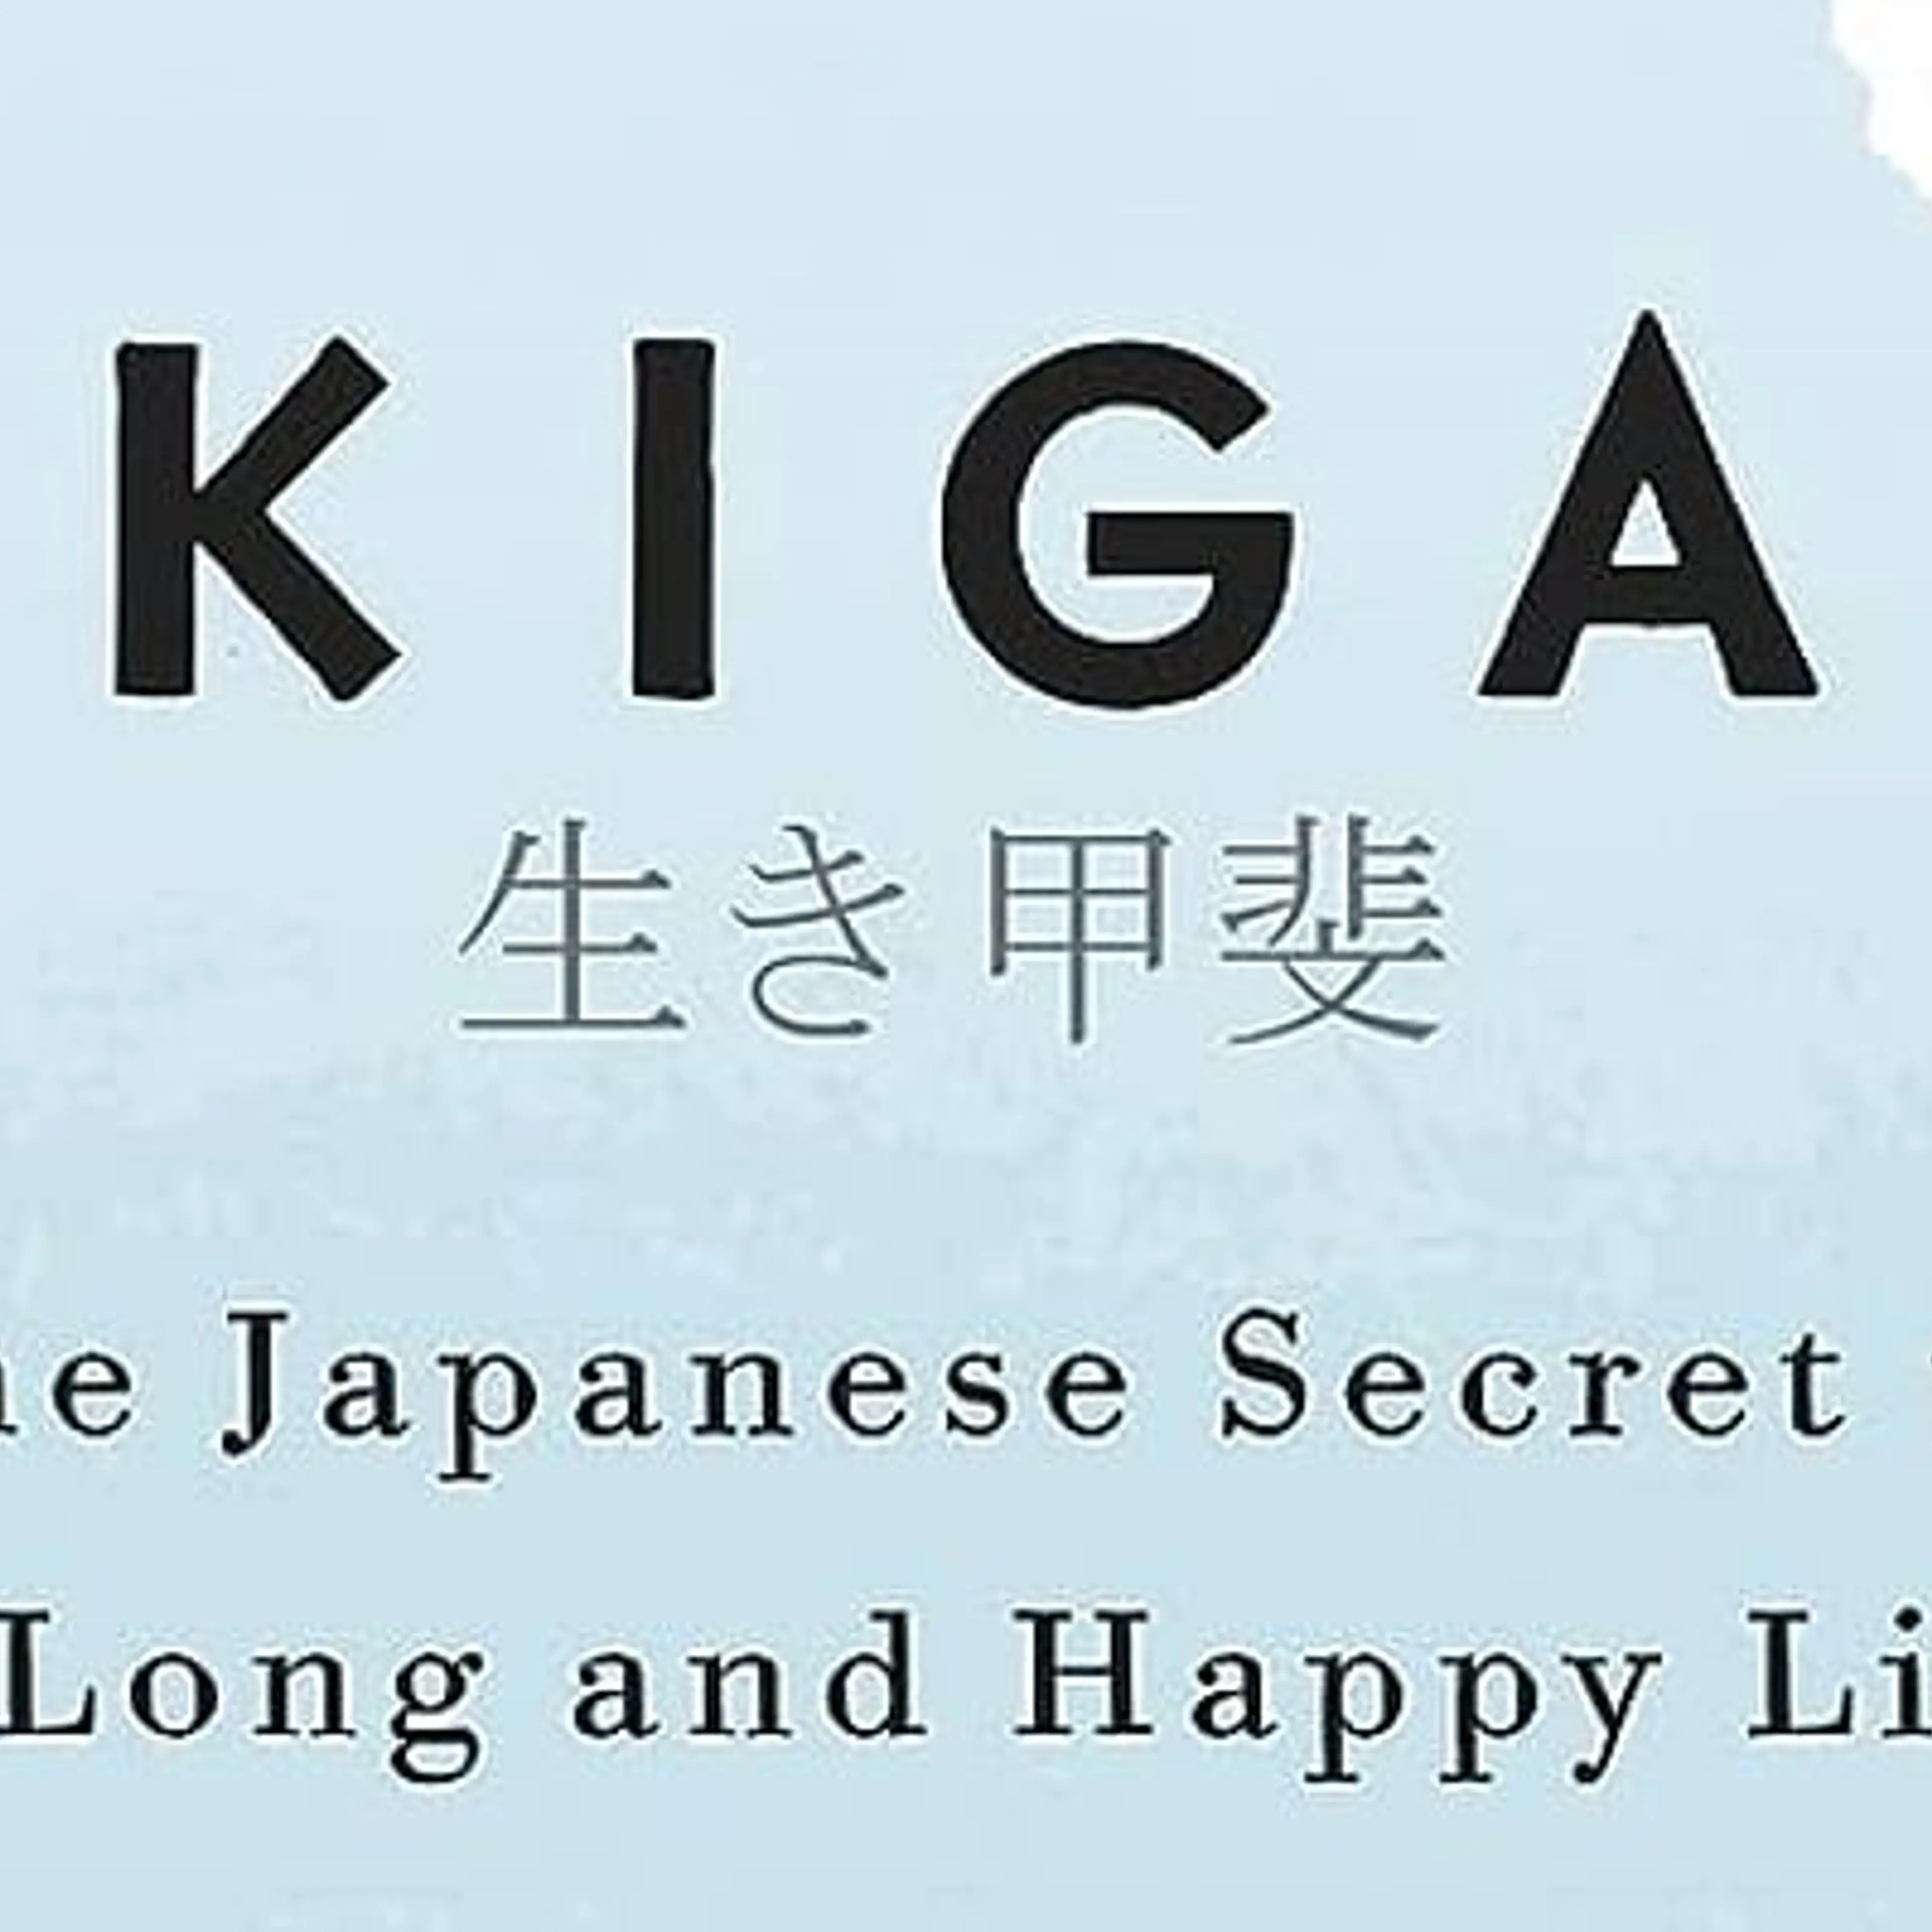 Mastering Ikigai: 10 japanese Rules to Transform Your Life